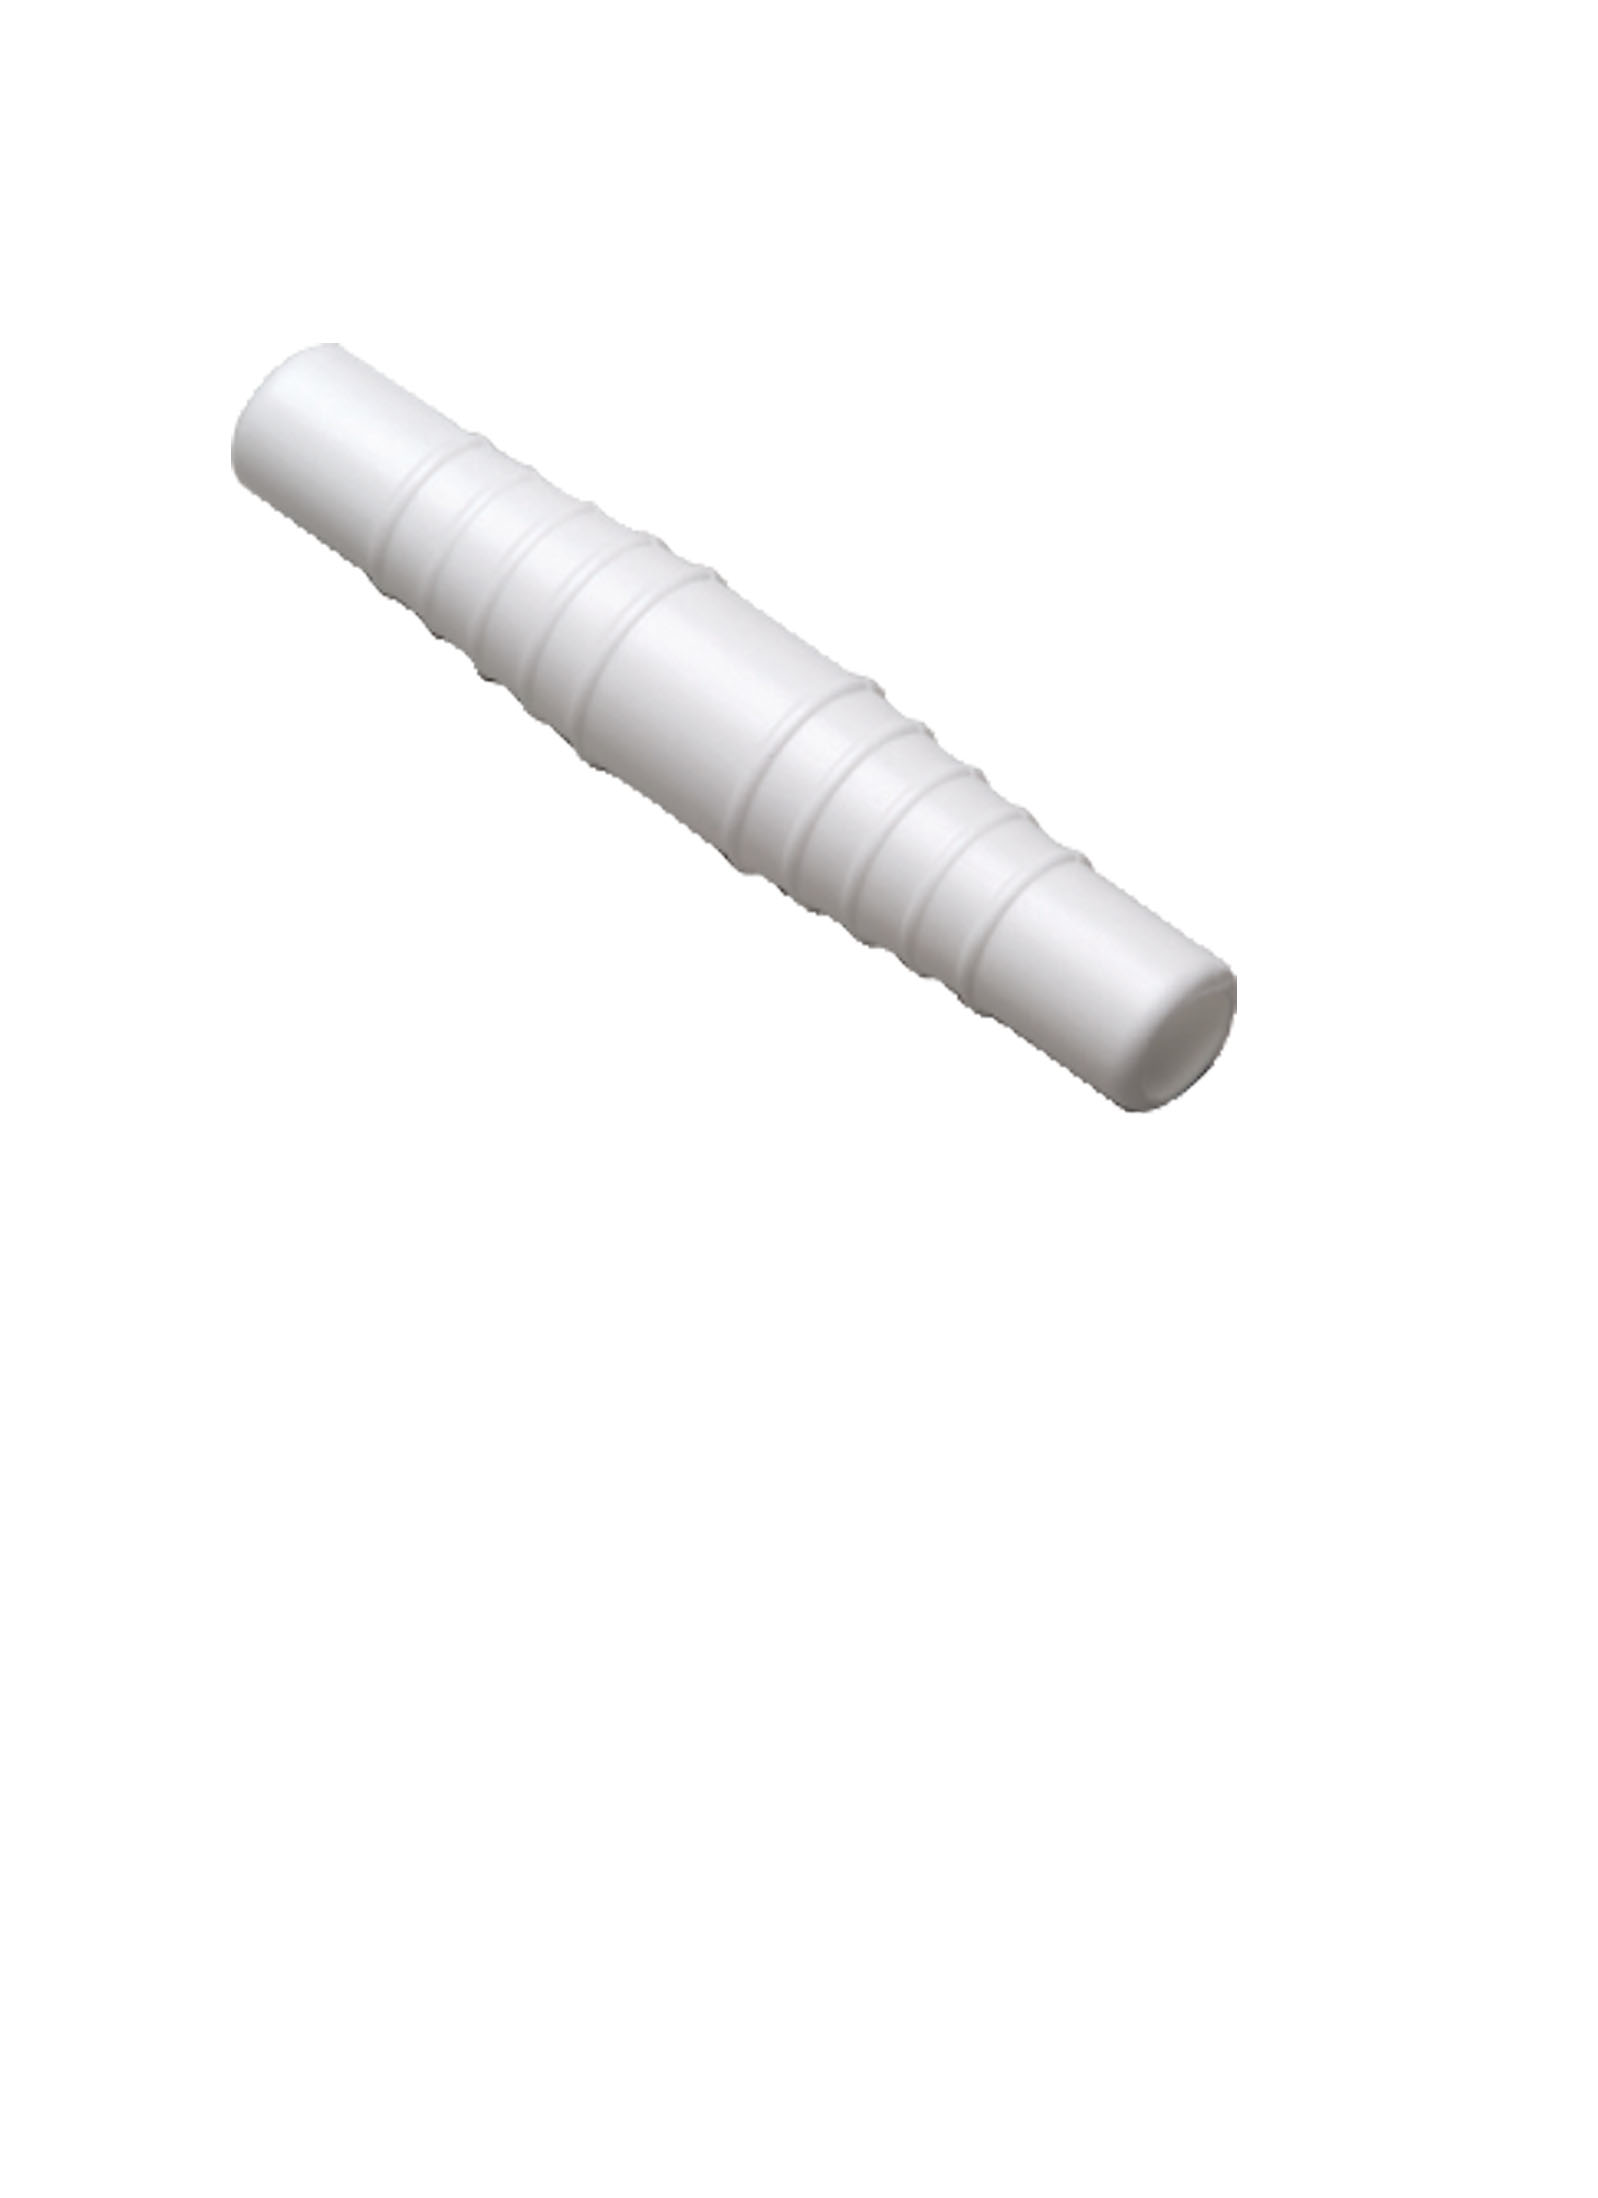 Hose Connector 175101 - CLEARANCE SAFETY COVERS